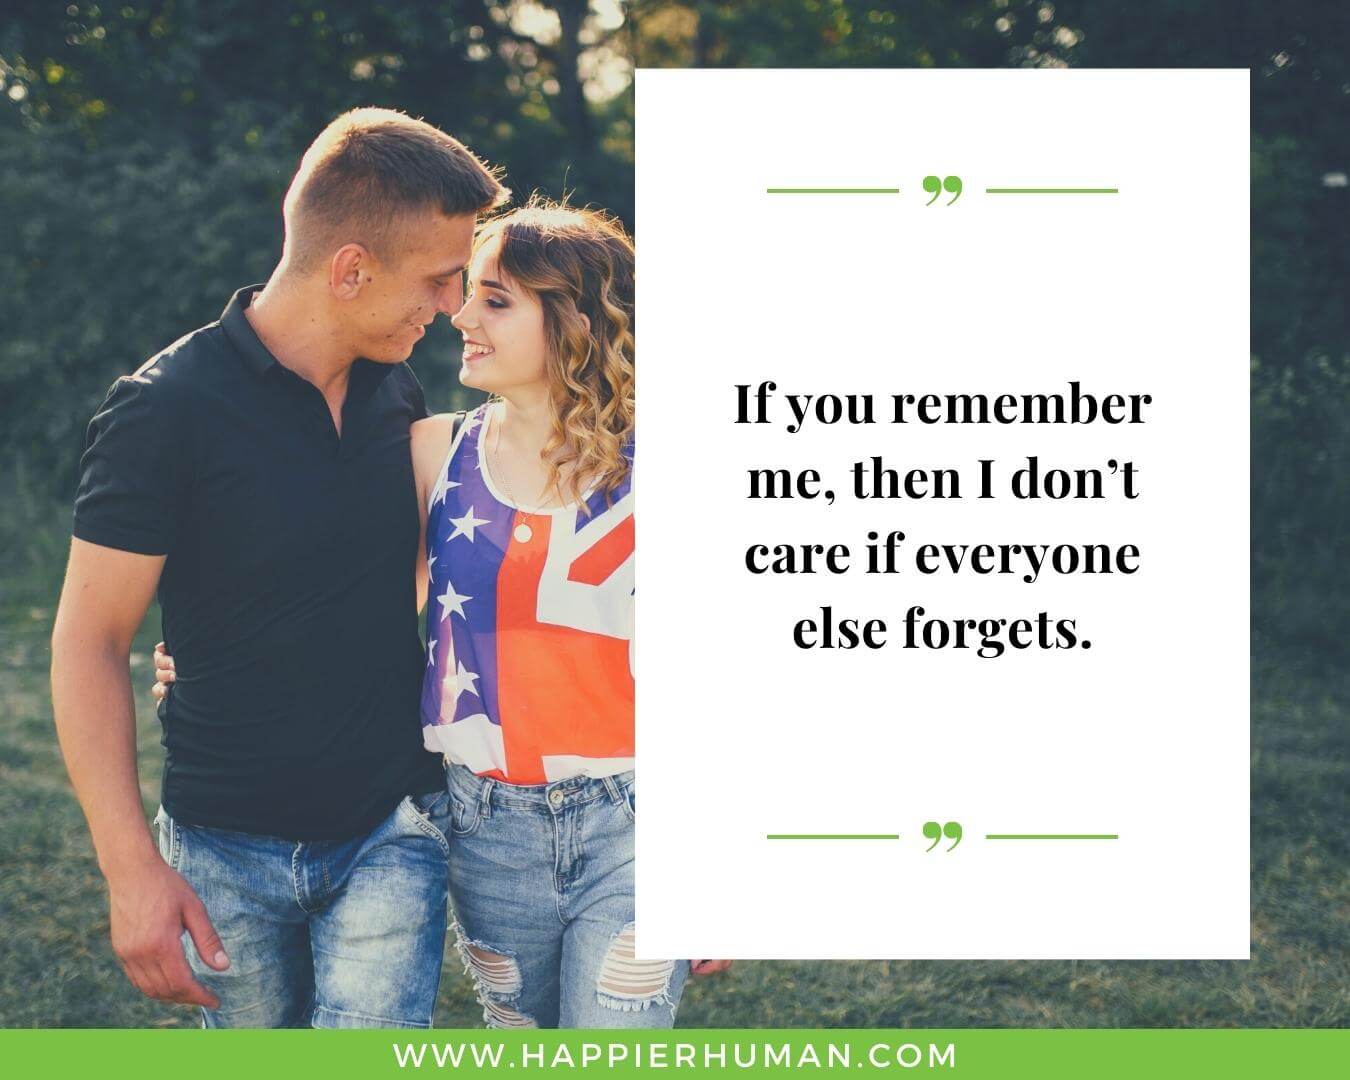 Never Forget Love Quotes for Her - “If you remember me, then I don’t care if everyone else forgets.”